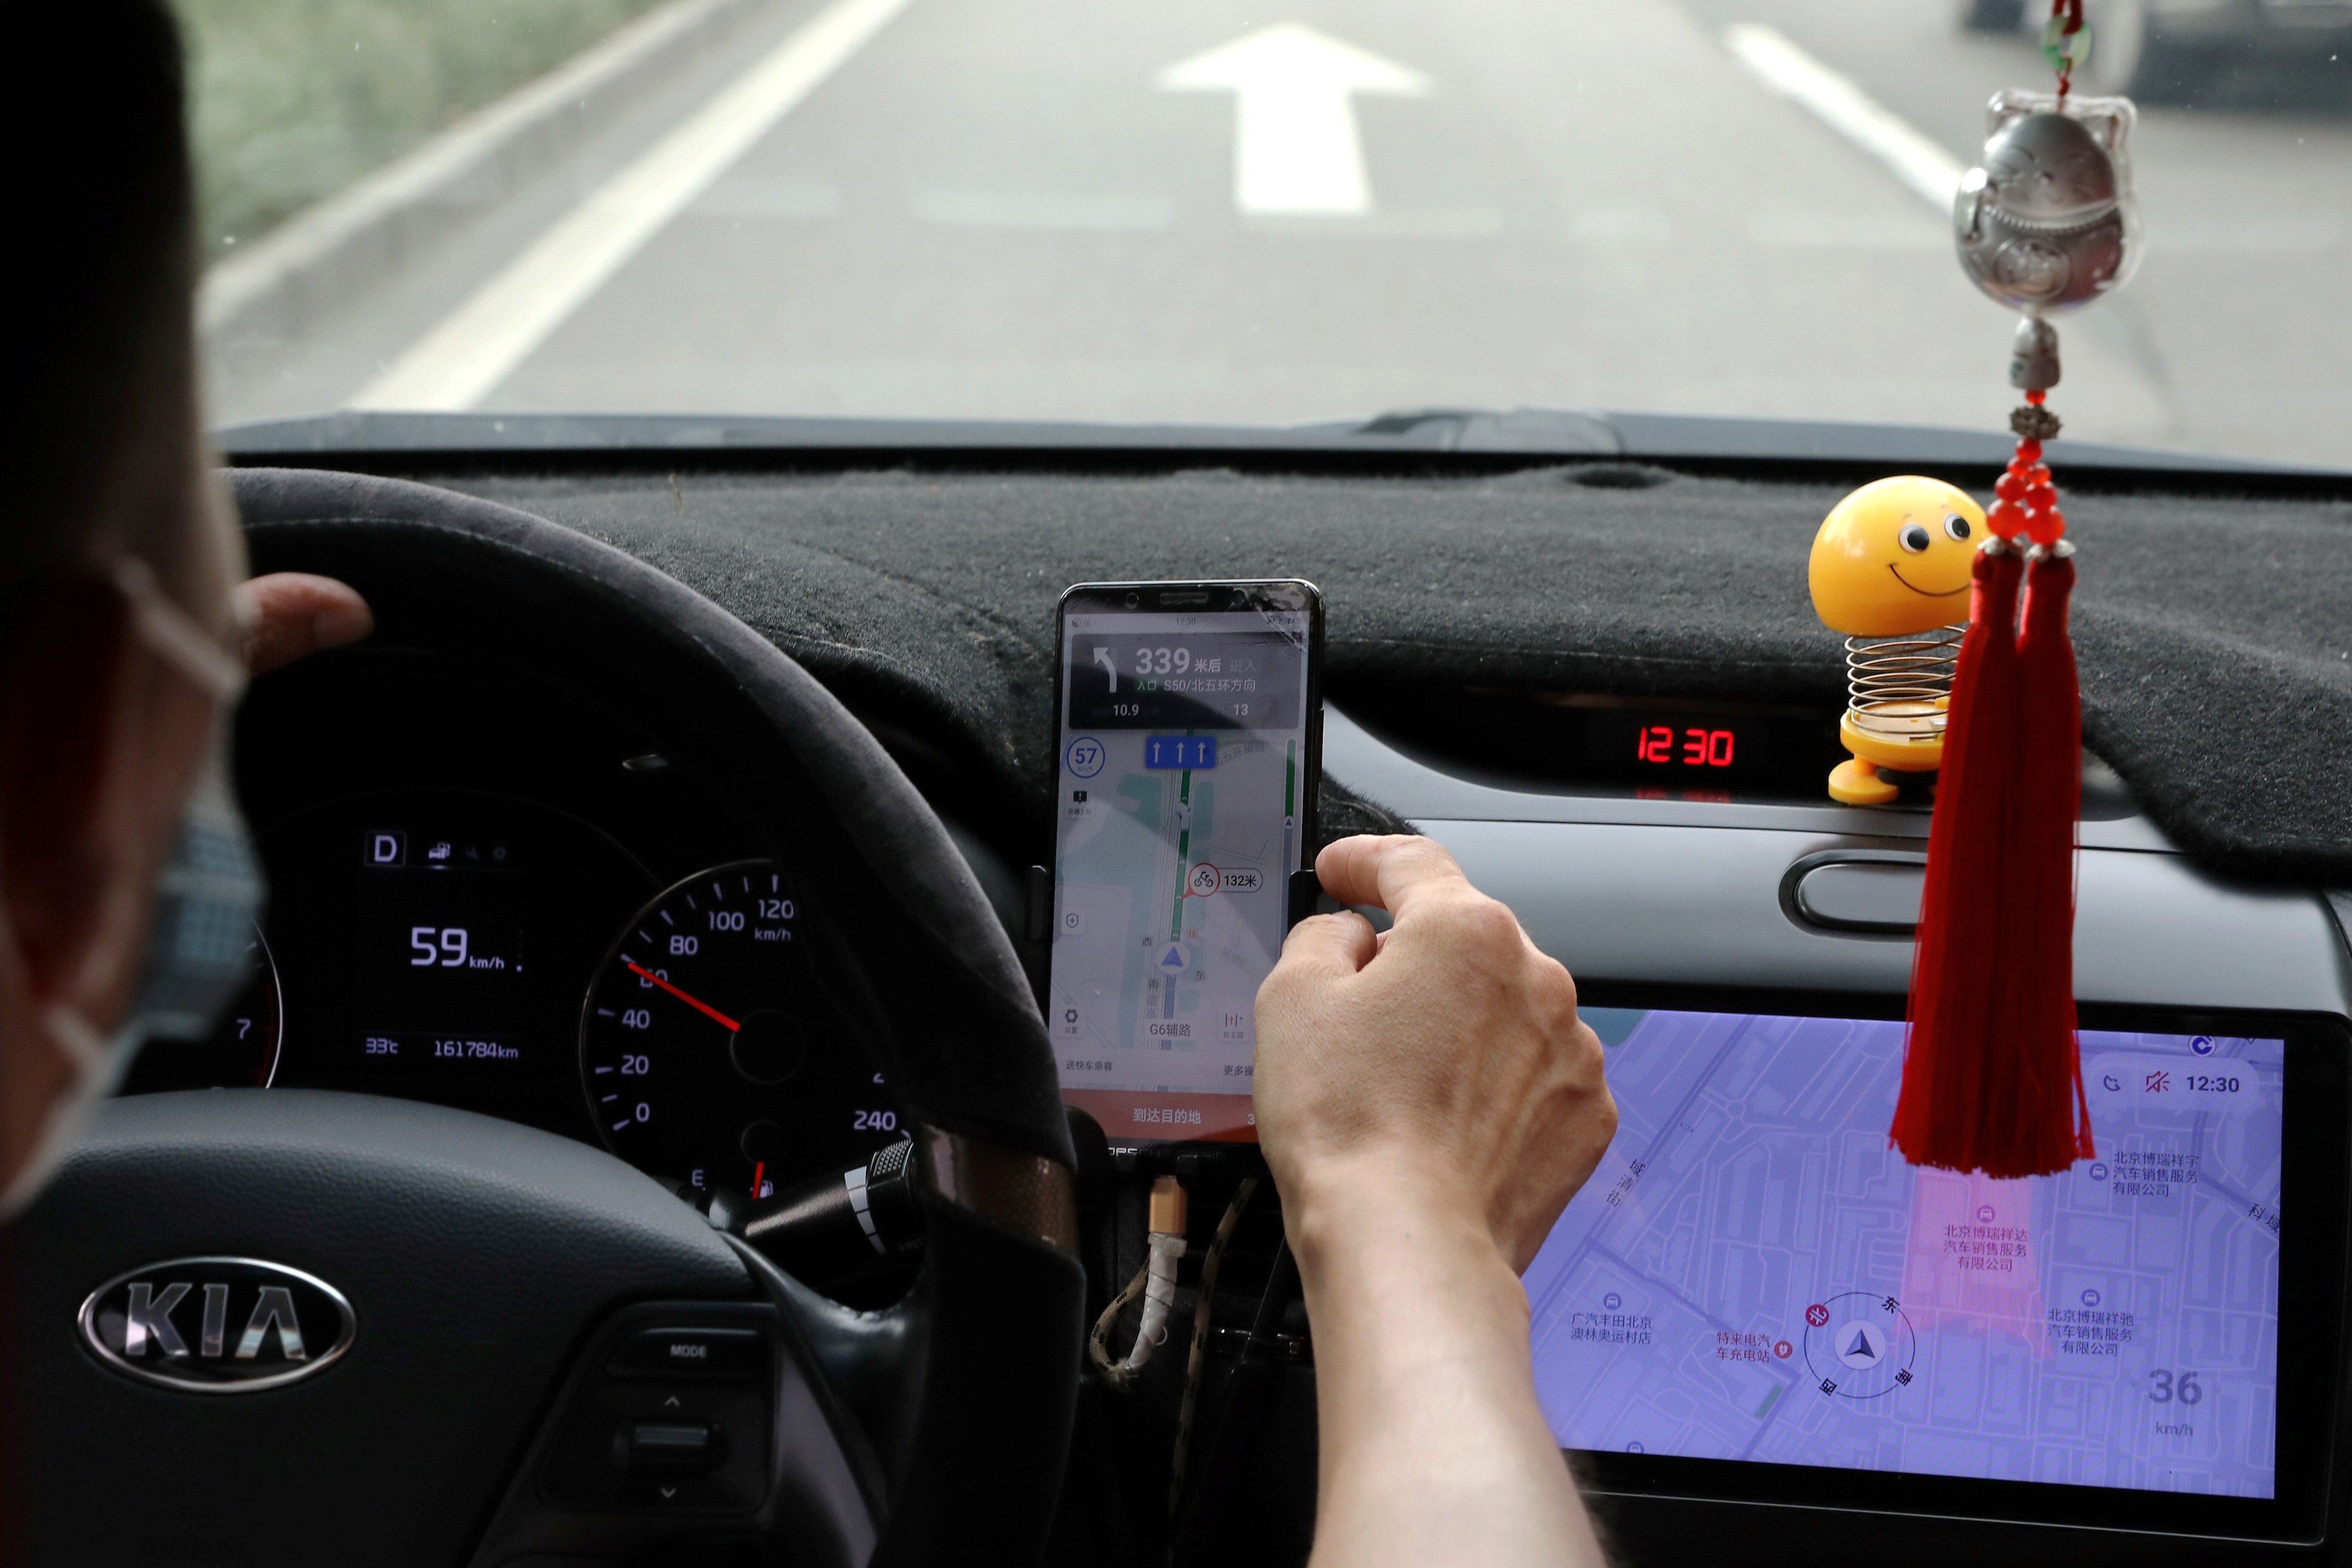 A driver of Chinese ride-hailing service Didi drives with a phone showing a navigation map on Didi's app, in Beijing on July 5, 2021. Photo: Reuters